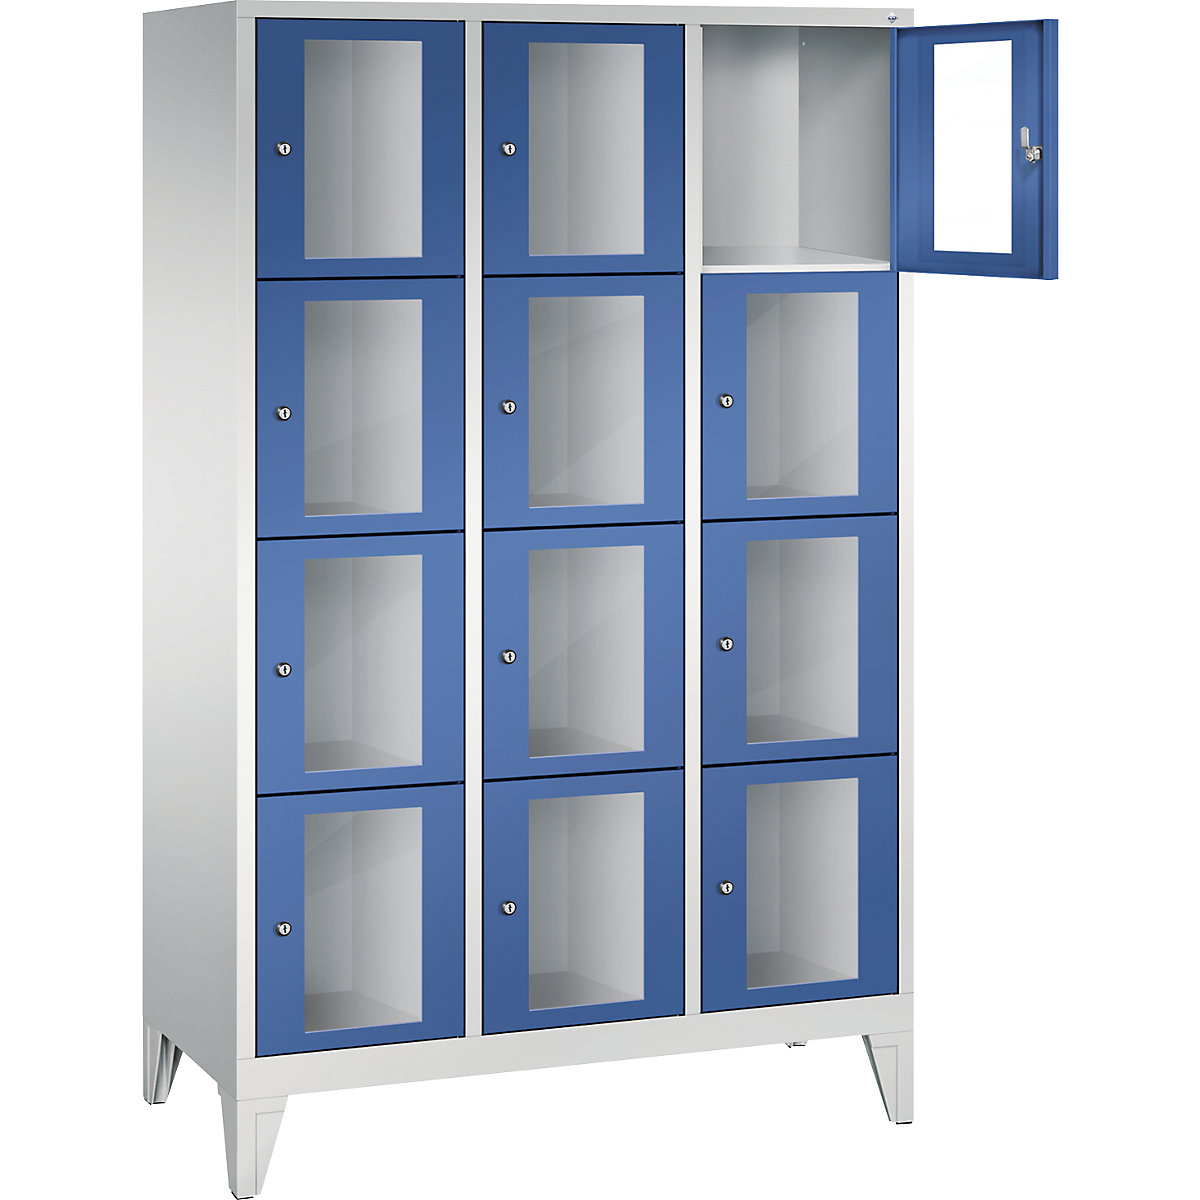 C+P – CLASSIC locker unit, compartment height 375 mm, with feet, 12 compartments, width 1200 mm, gentian blue door